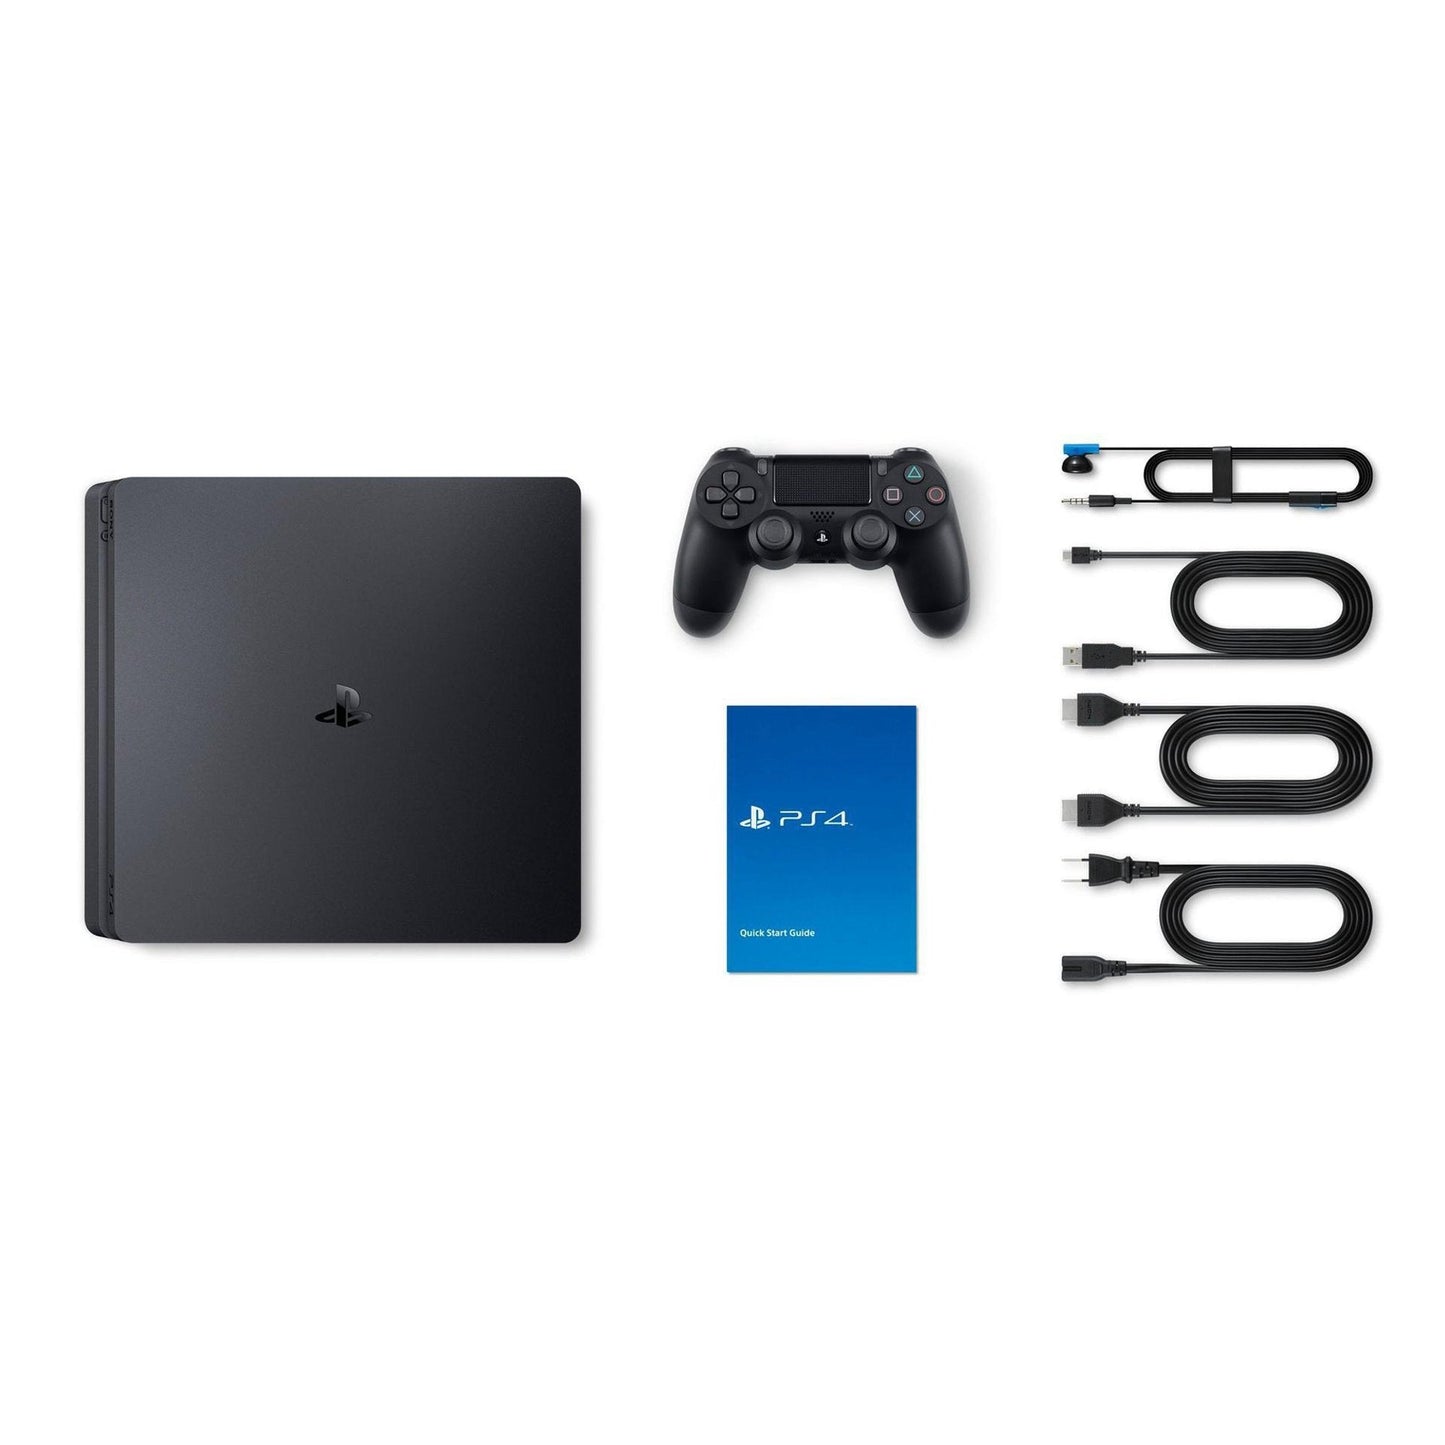 Sony 2215B PlayStation 4 Slim 1TB Gaming Console Black with HDMI Cable (Refurbished)